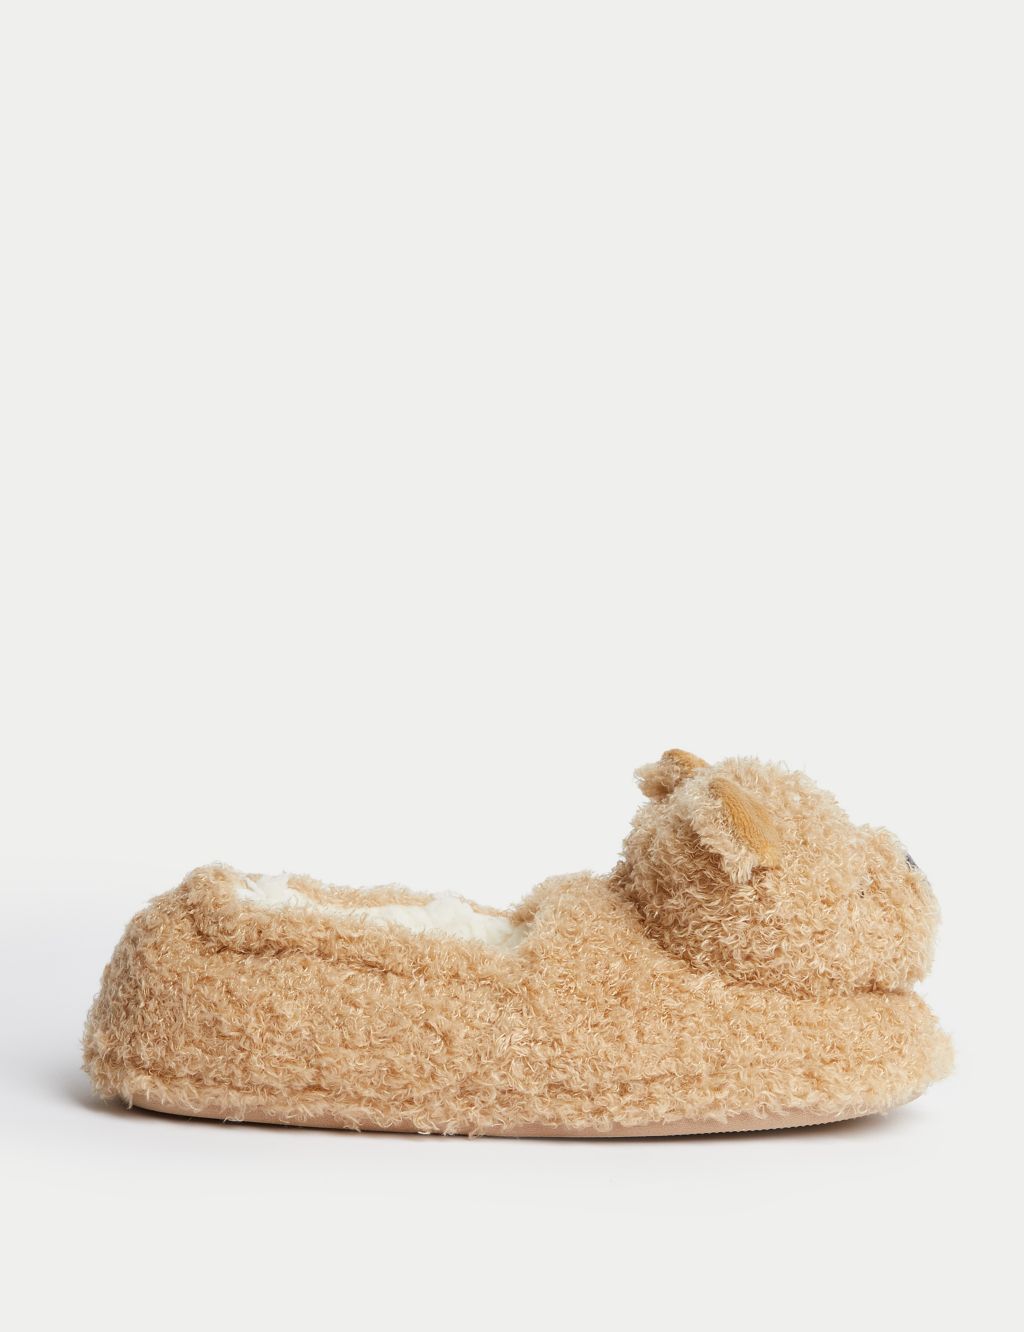 Kids' Spencer Bear Slippers (4 Small - 7 Large) image 1